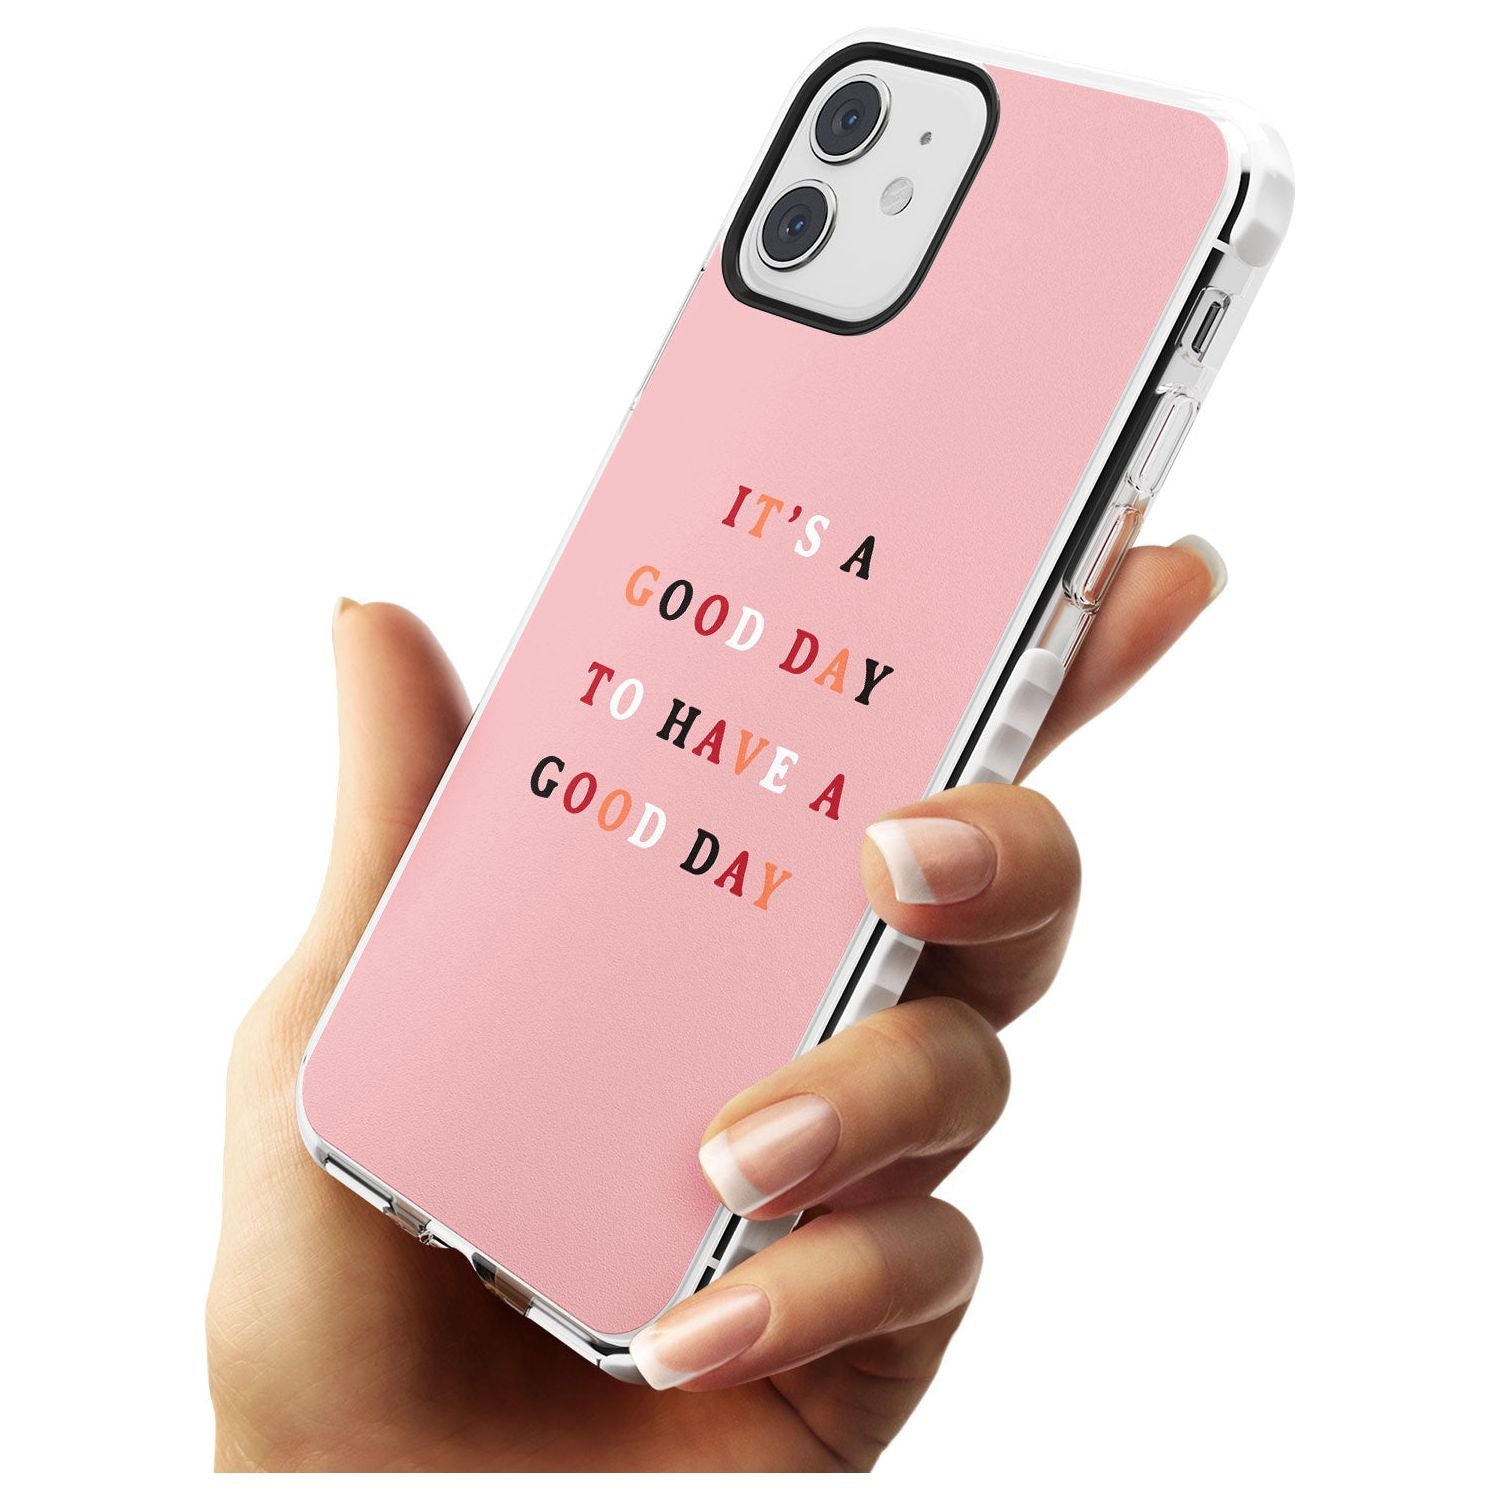 It's a good day to have a good day Impact Phone Case for iPhone 11